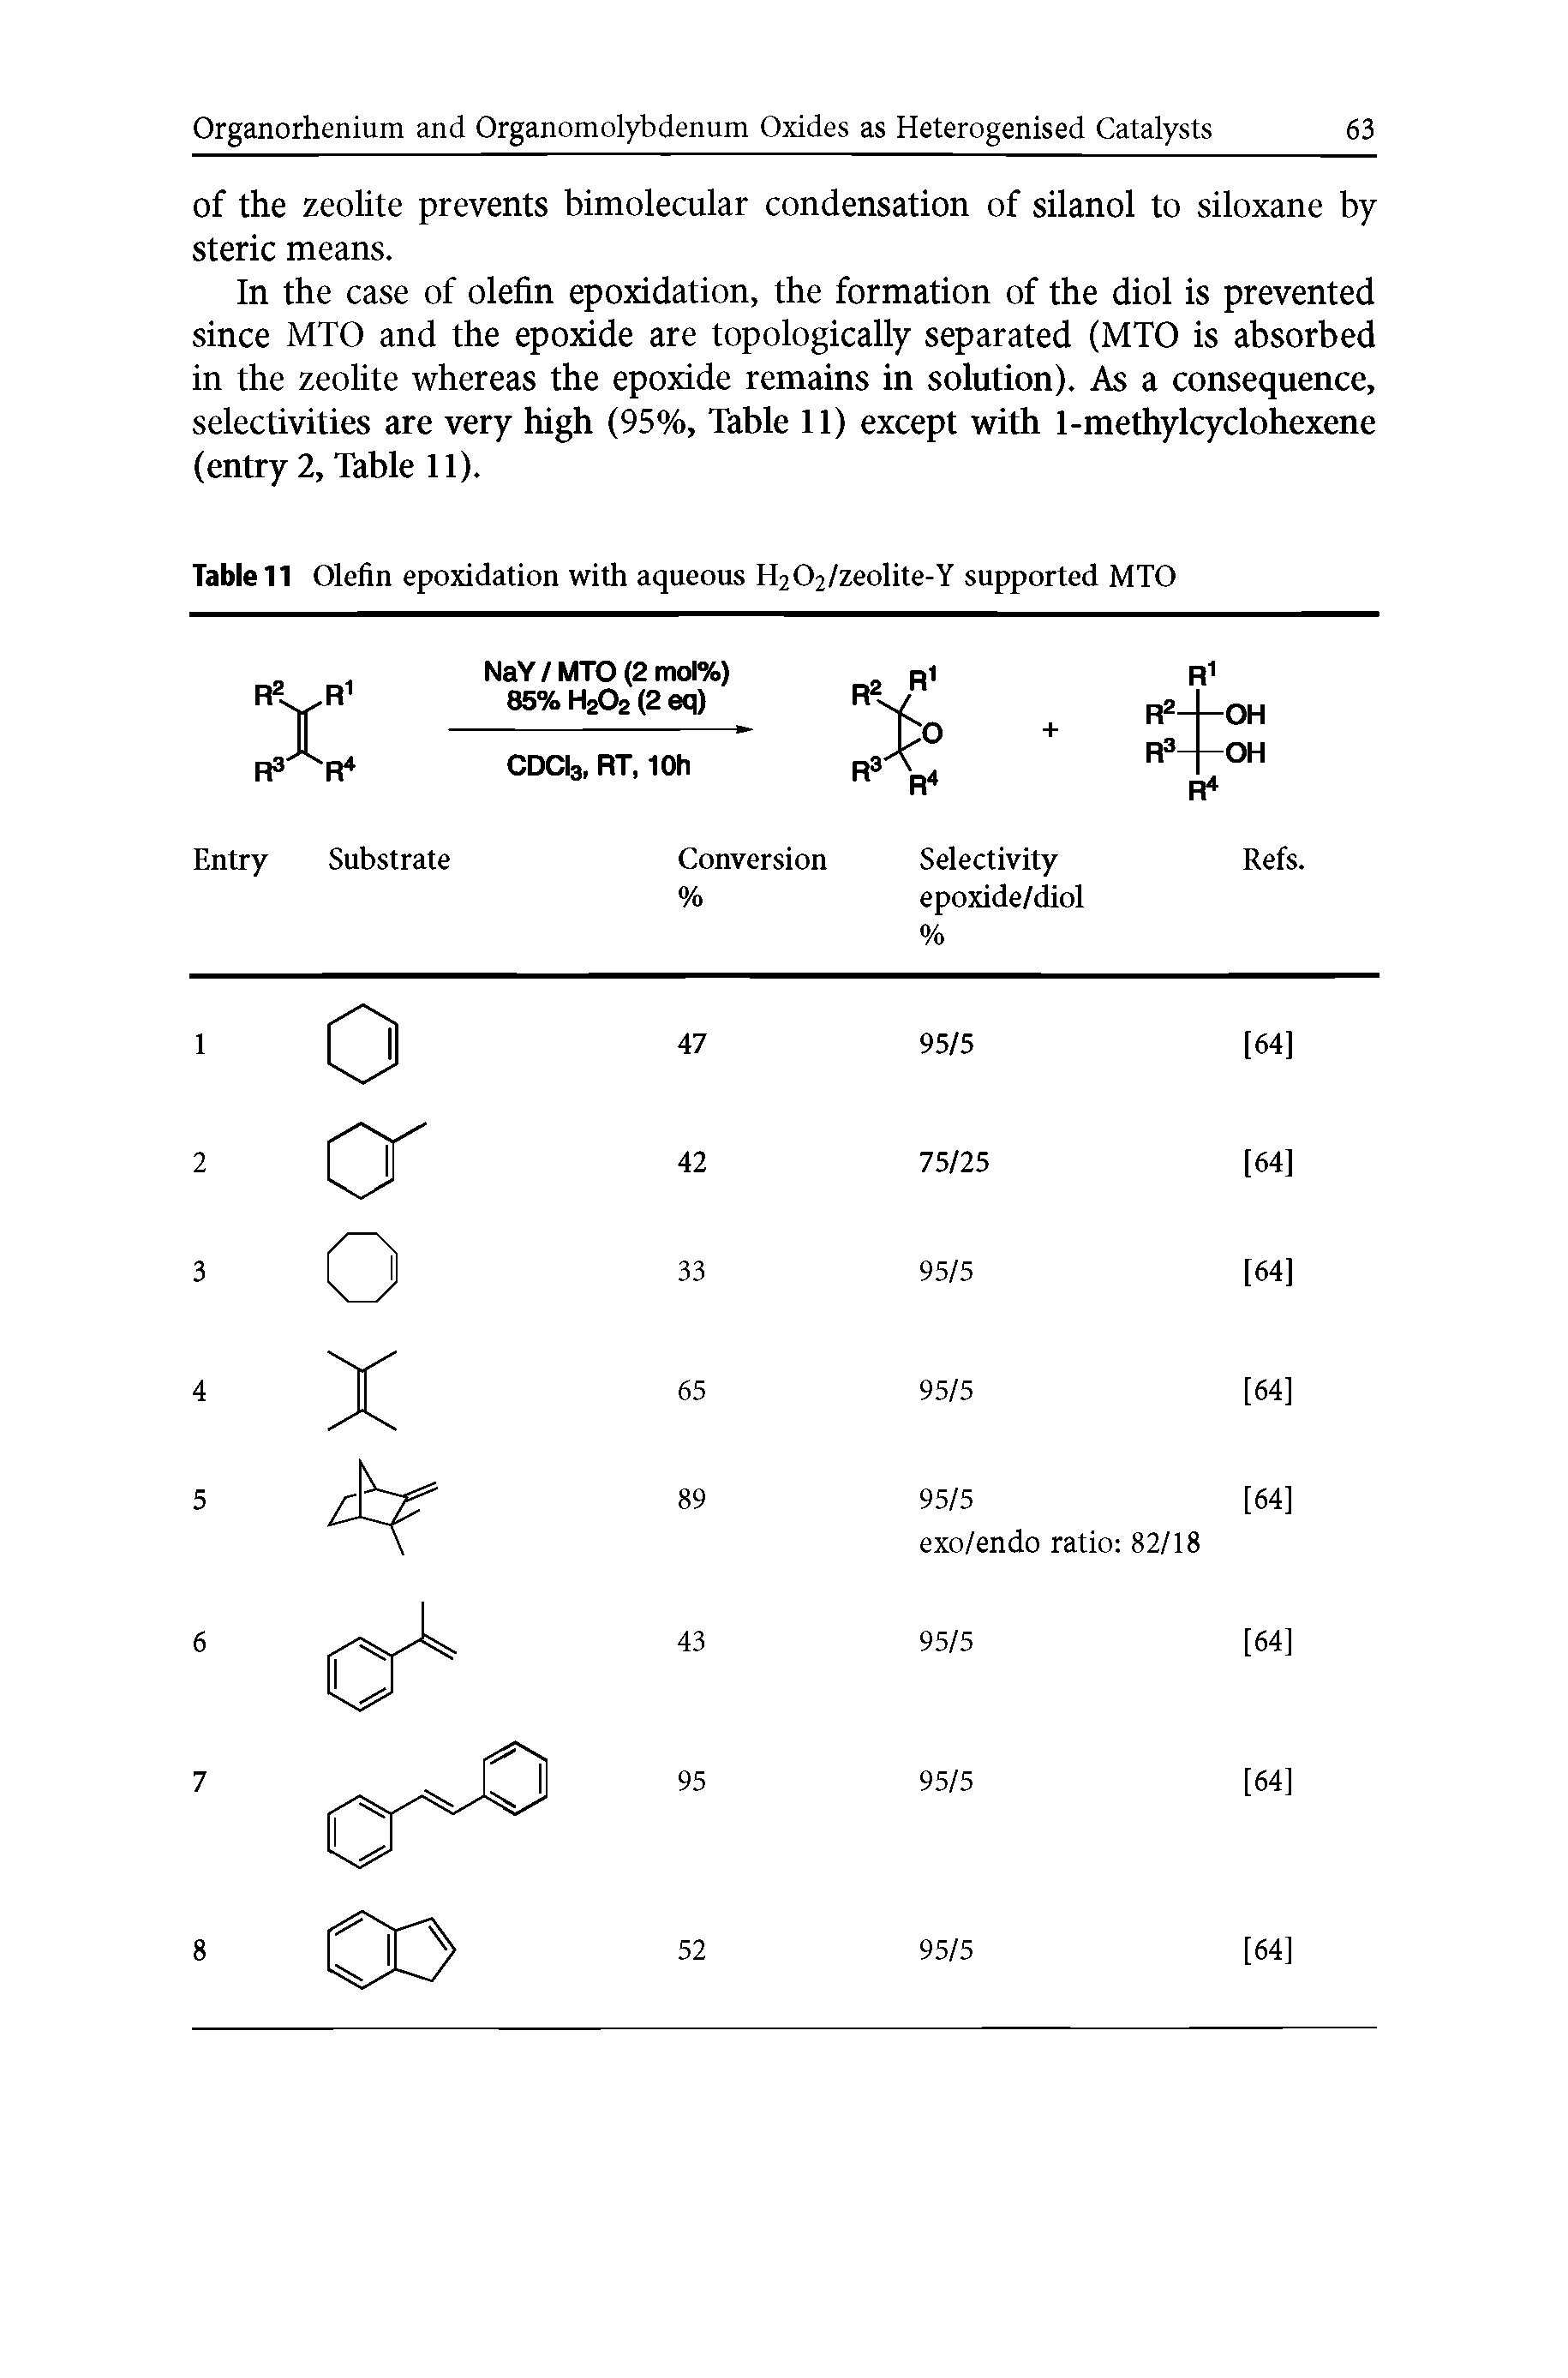 Table 11 Olefin epoxidation with aqueous H202/zeolite-Y supported MTO...